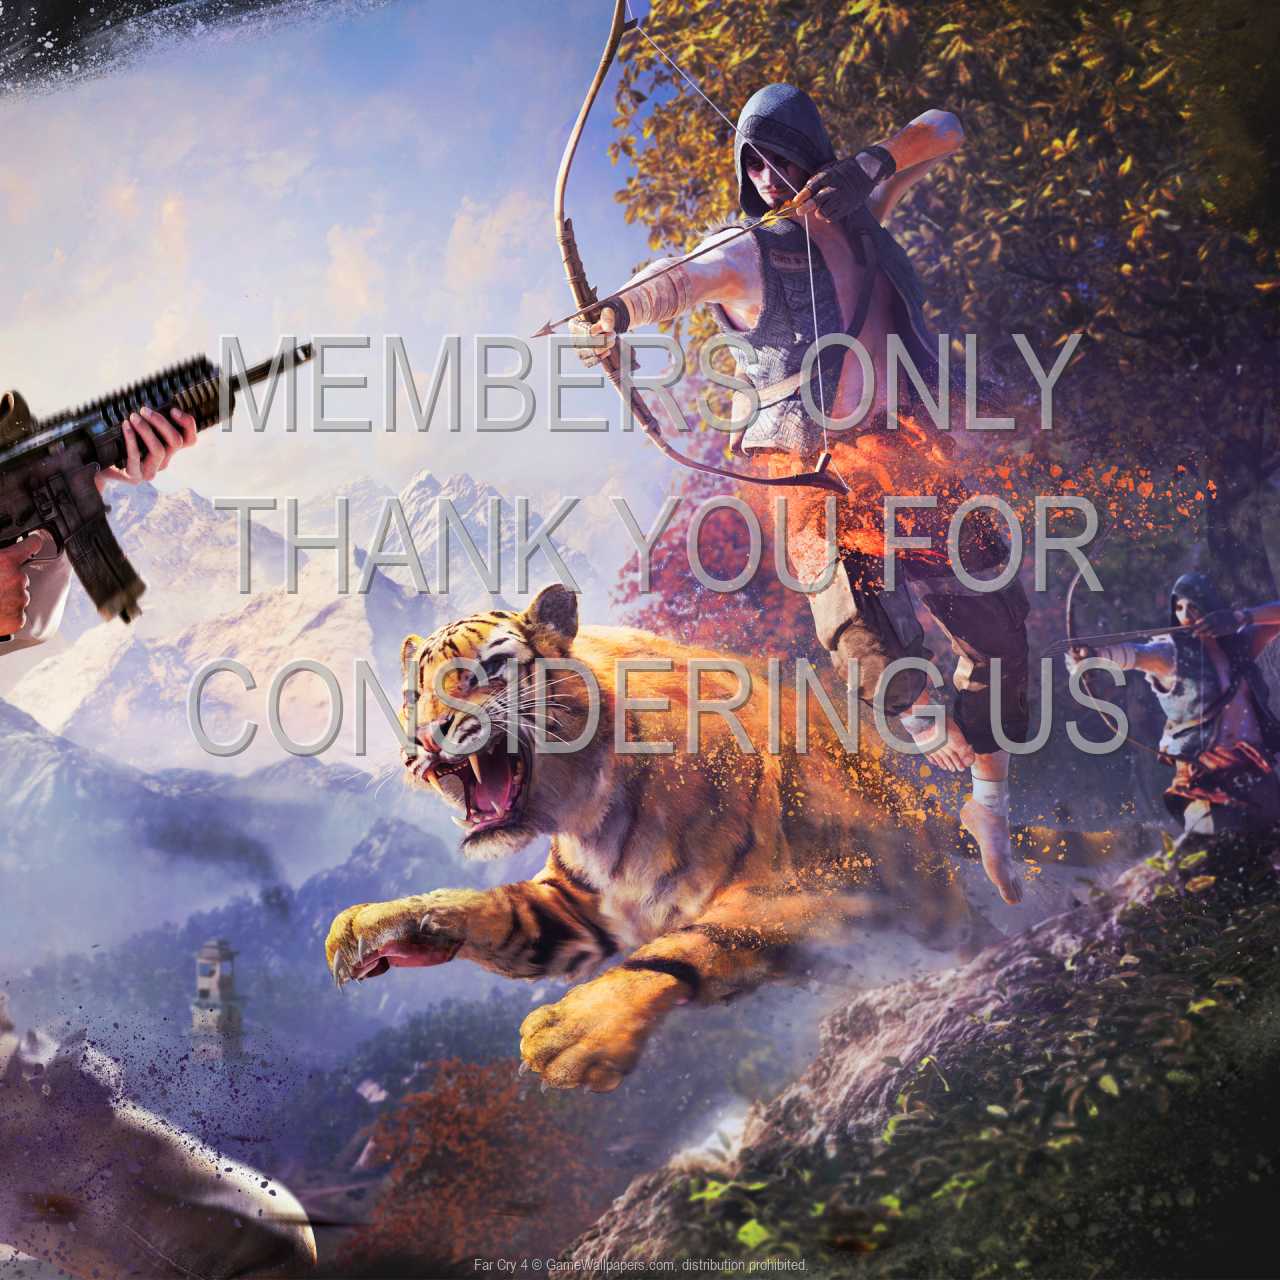 Far Cry 4 720p%20Horizontal Mobile wallpaper or background 05